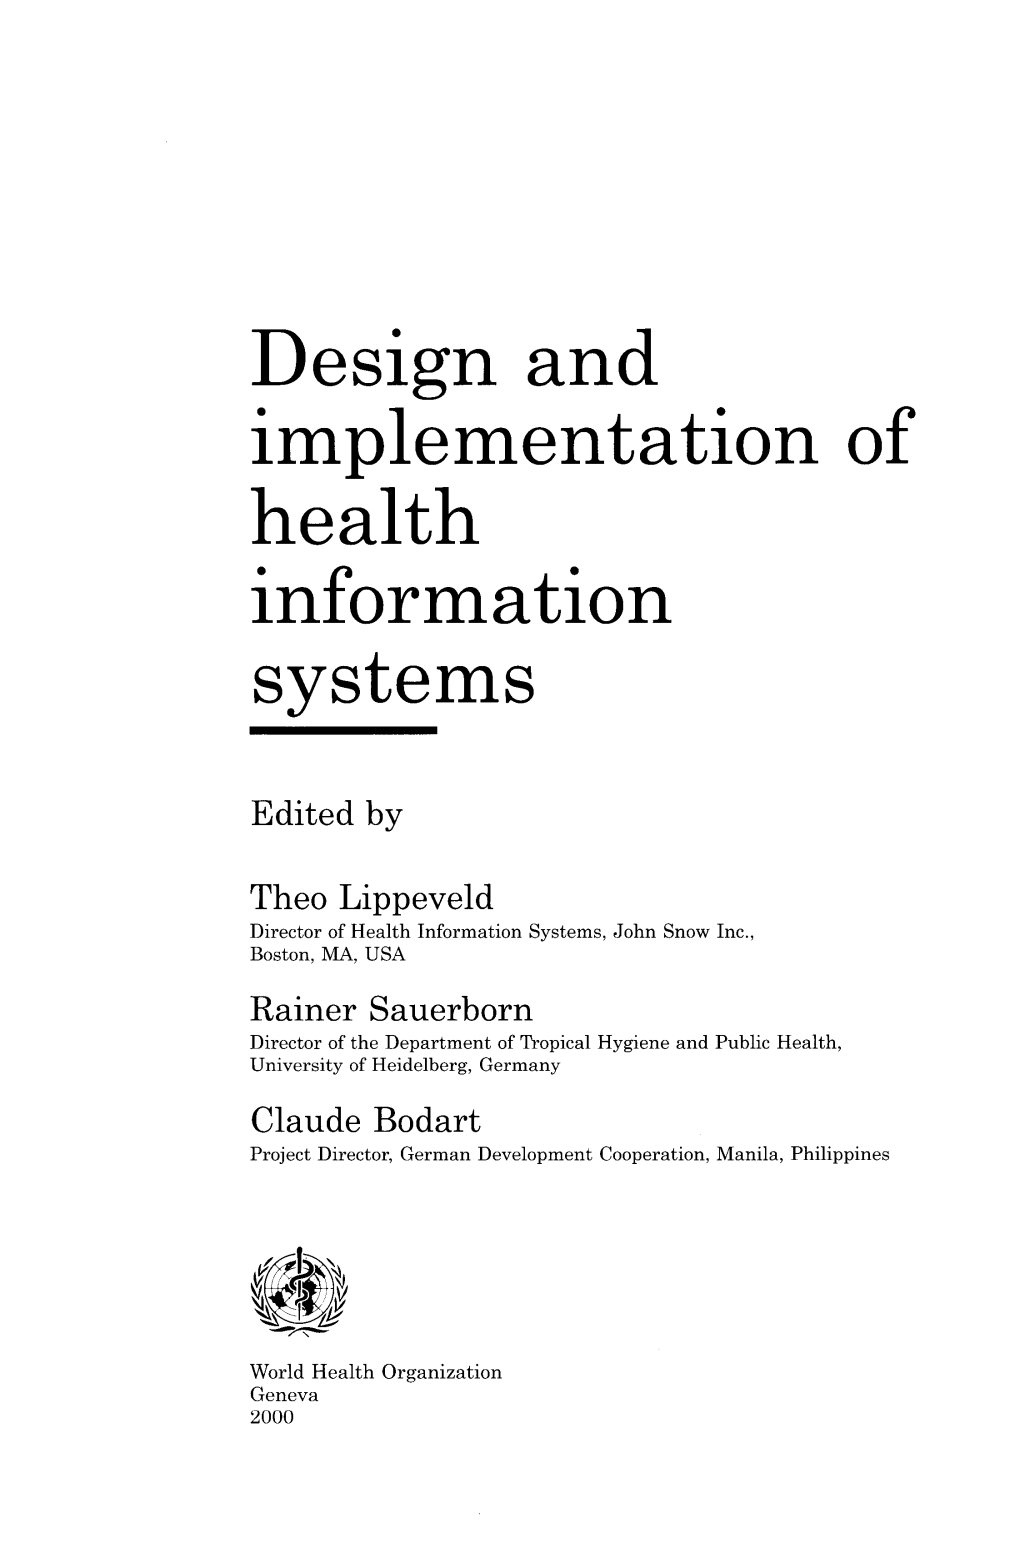 Design and Implementation of Health Information Systems